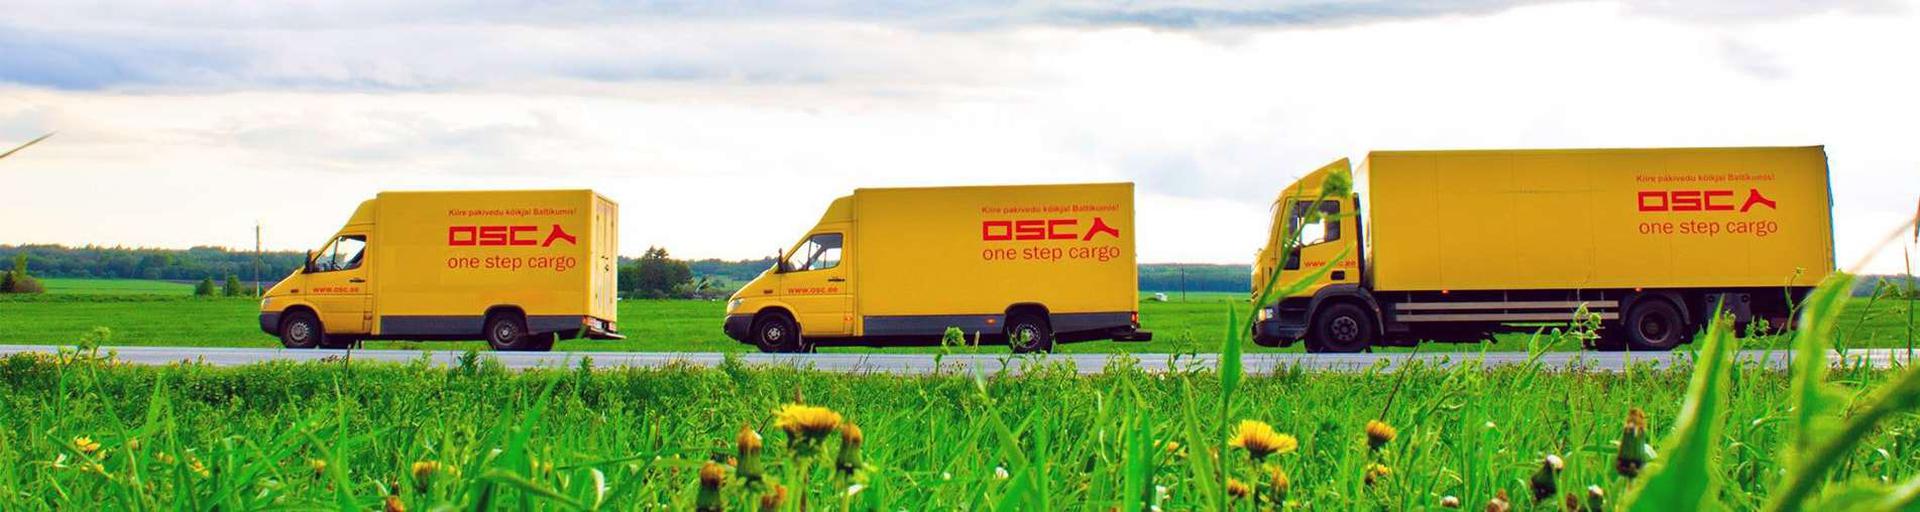 transport and courier services, Post and communication, Postal service